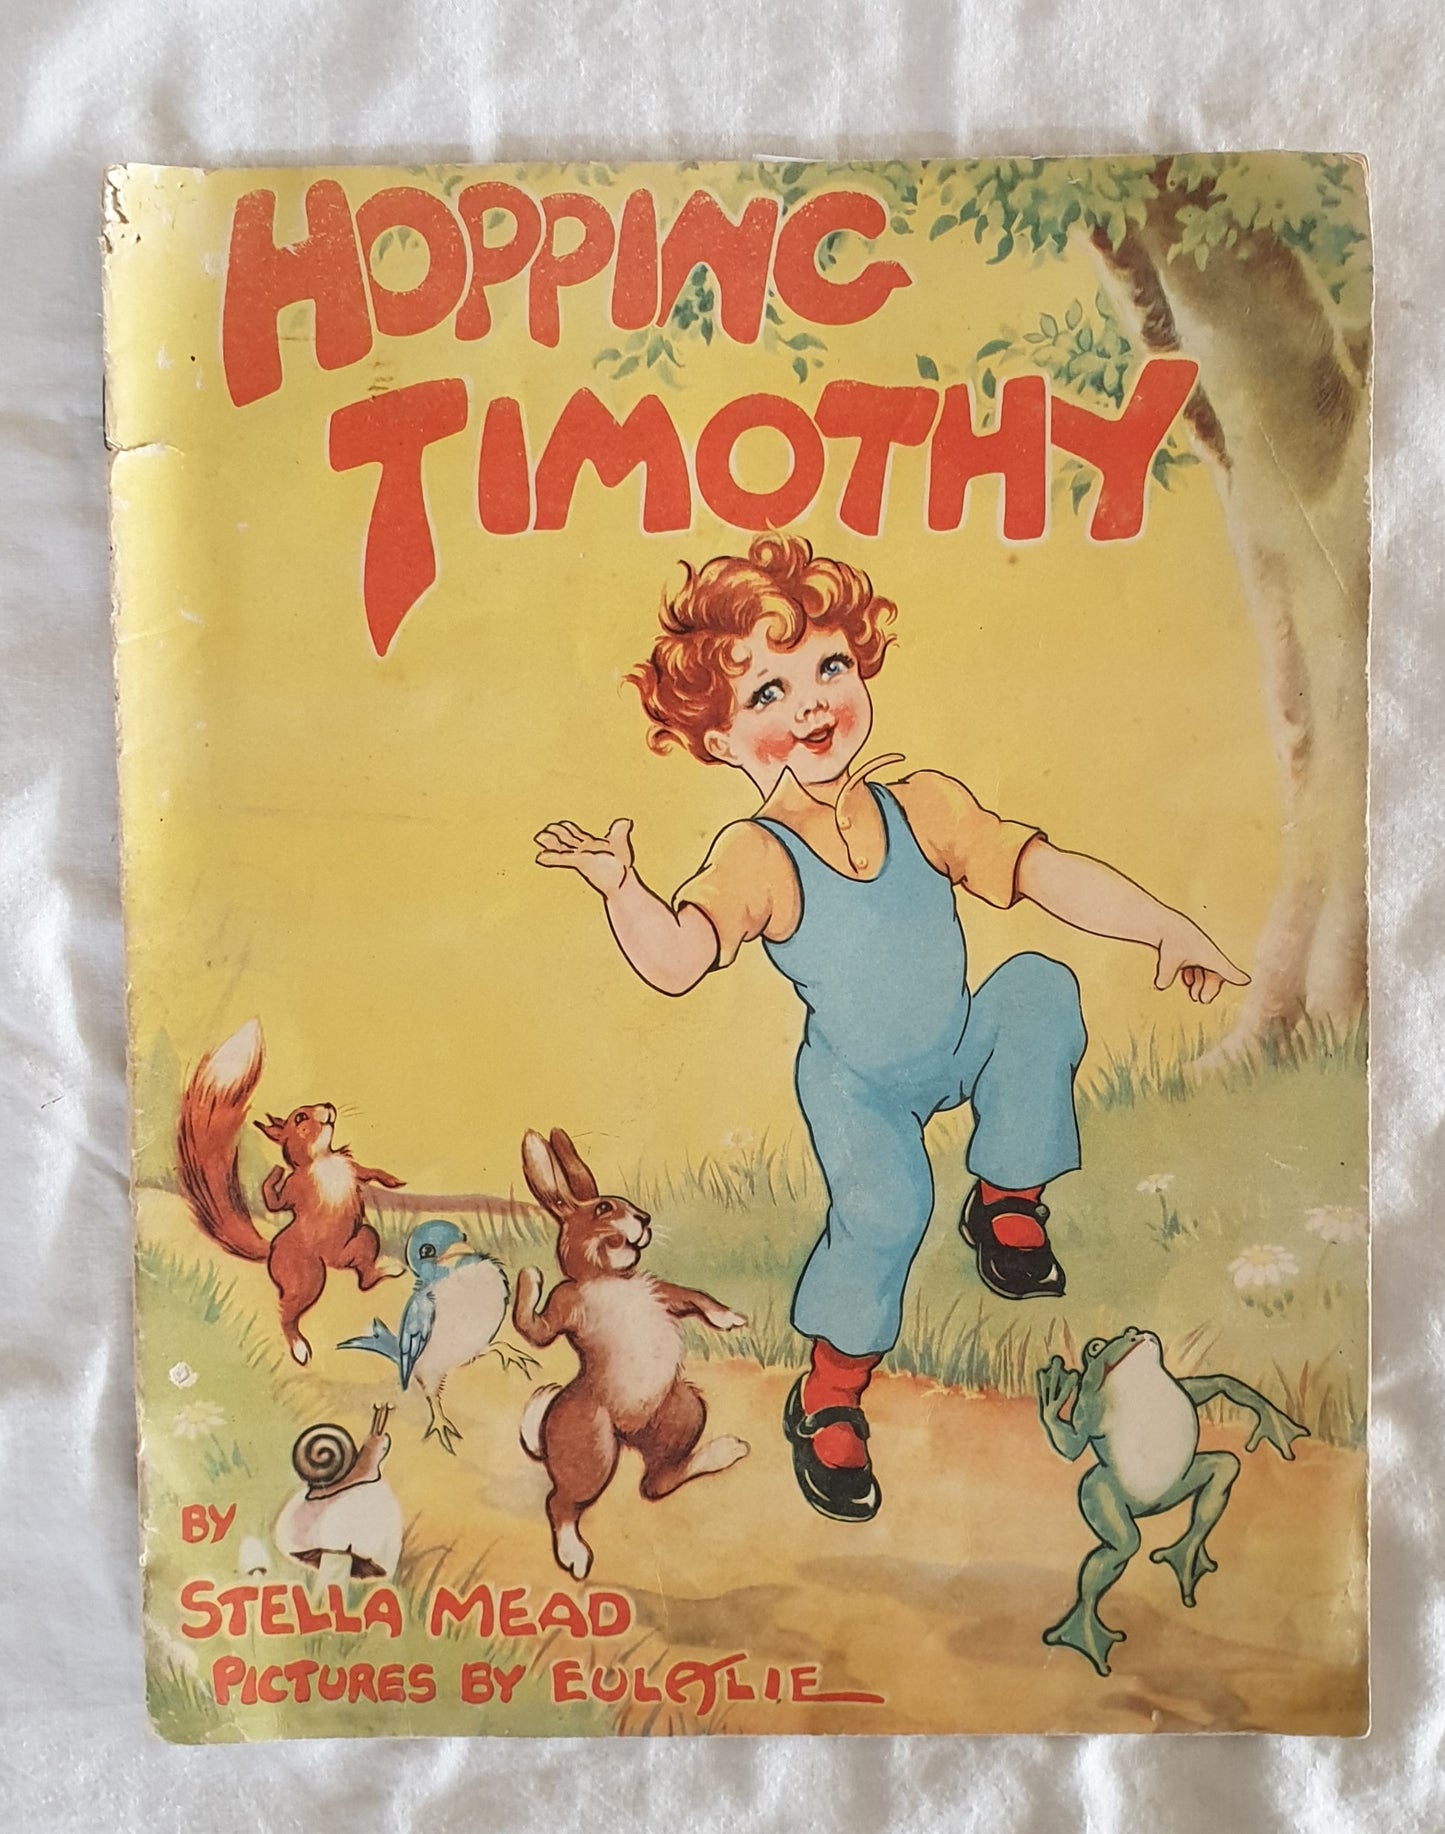 Hopping Timothy  by Stella Mead